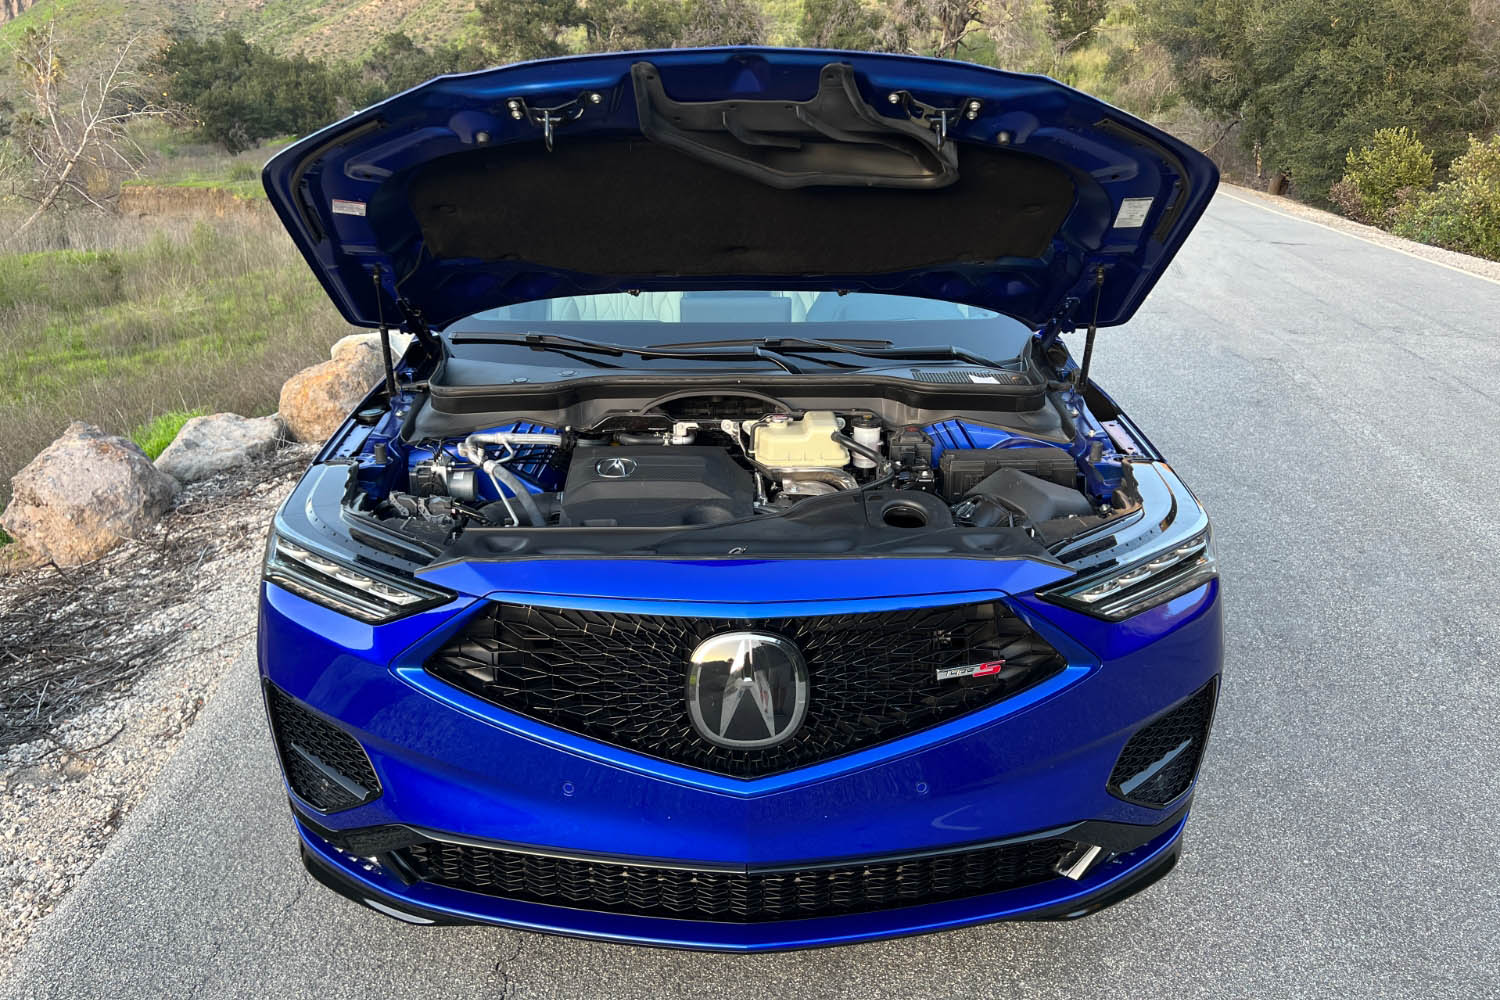 2023 Acura MDX Type S in Apex Blue Pearl with the hood up displaying the engine bay and the turbocharged 3.0-liter V6.